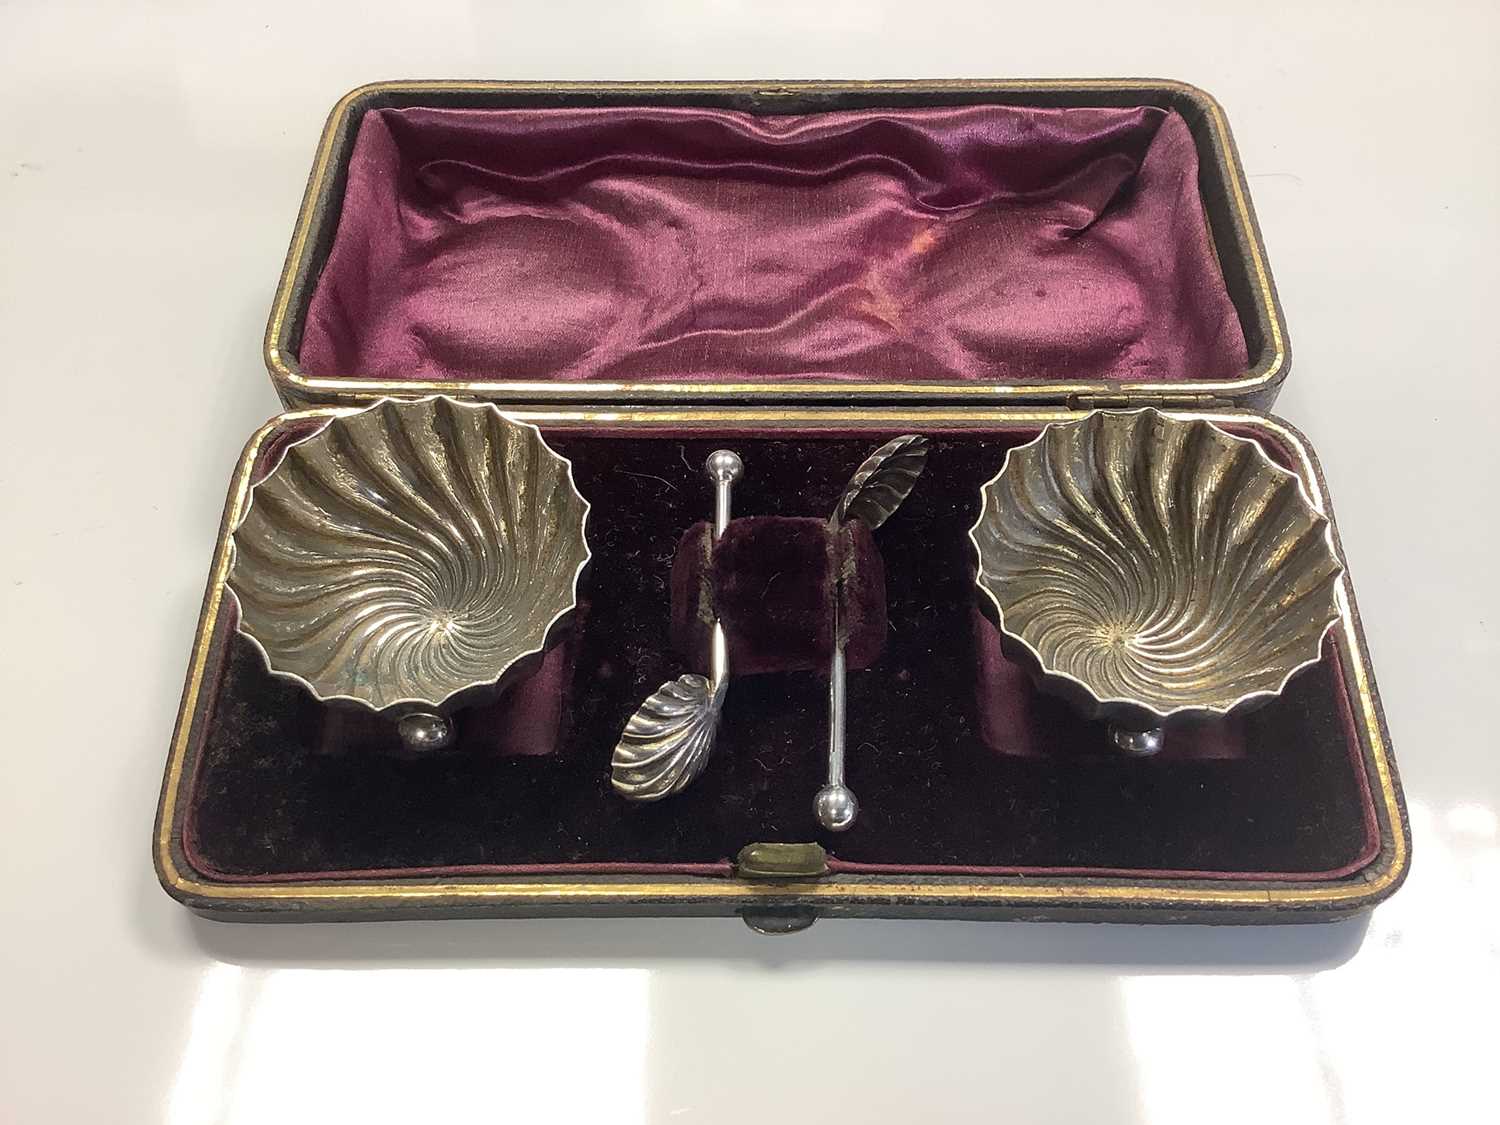 Lot 80 - Pair of Victorian silver salt spoons (Birmingham 1891), together with a pair of plated salt cellars, in a fitted case.